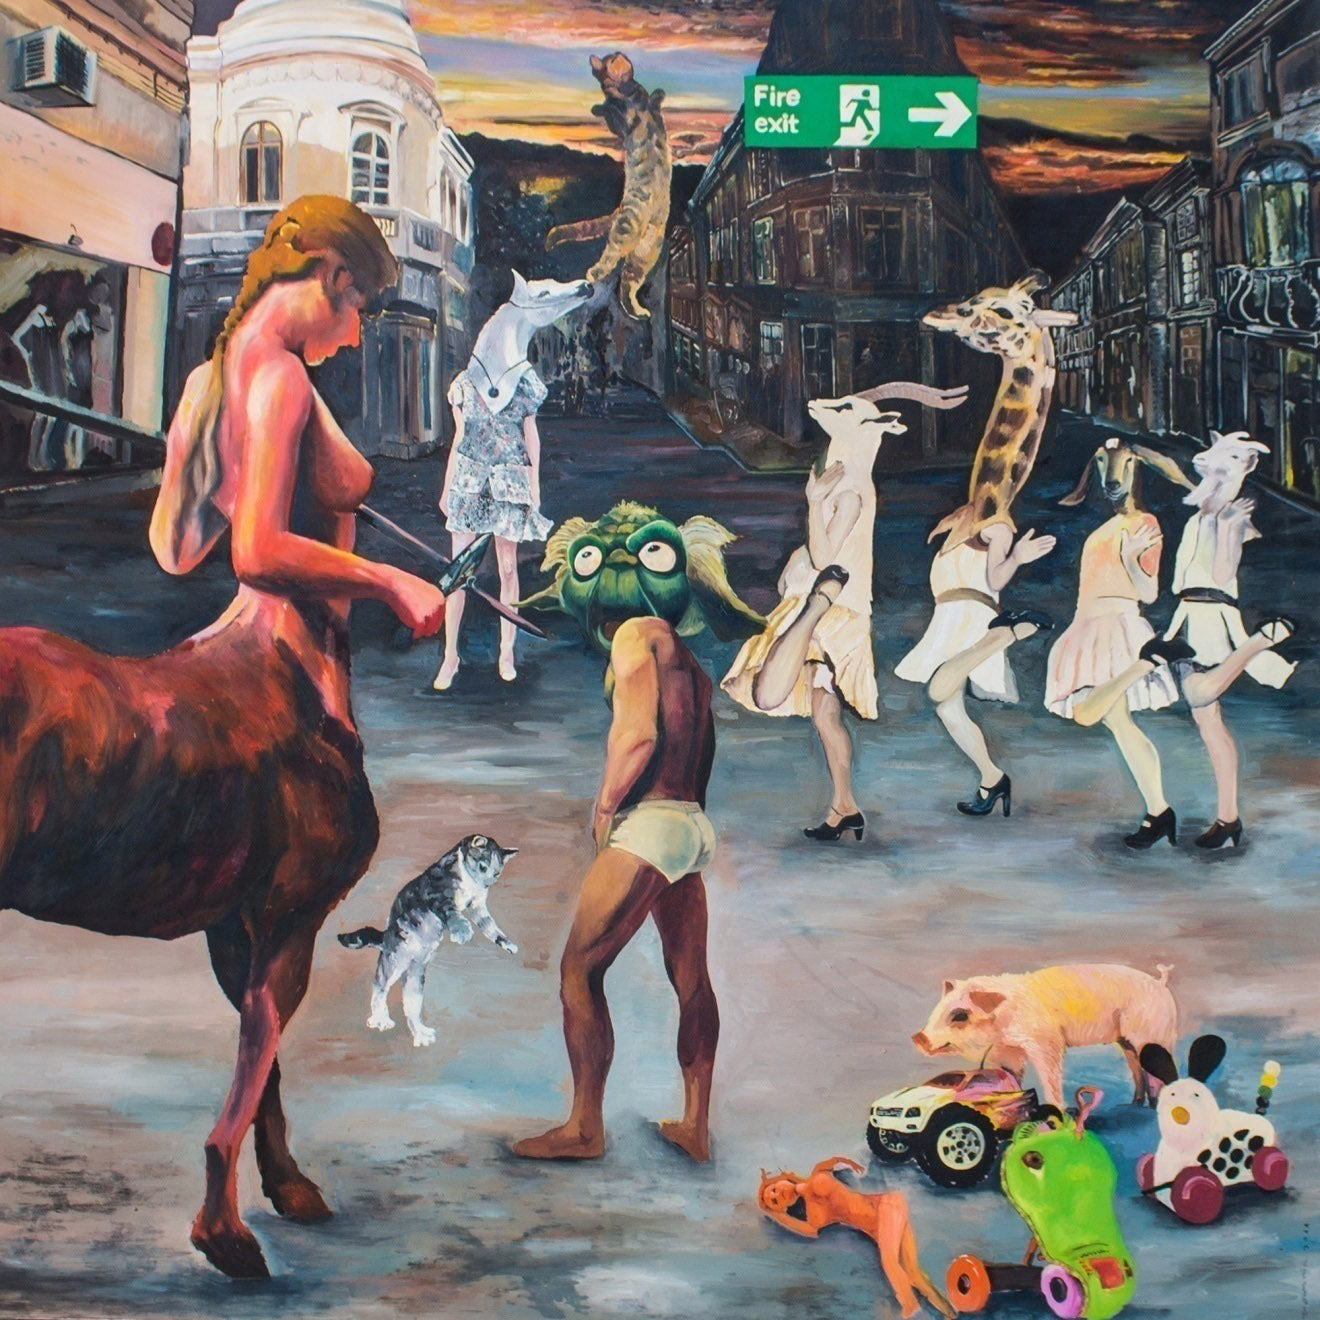 Amazons, 200x200cm, oil on canvas, 2011 - beautiful and intriguing original contemporary art painting by artist Dominic Virtosu